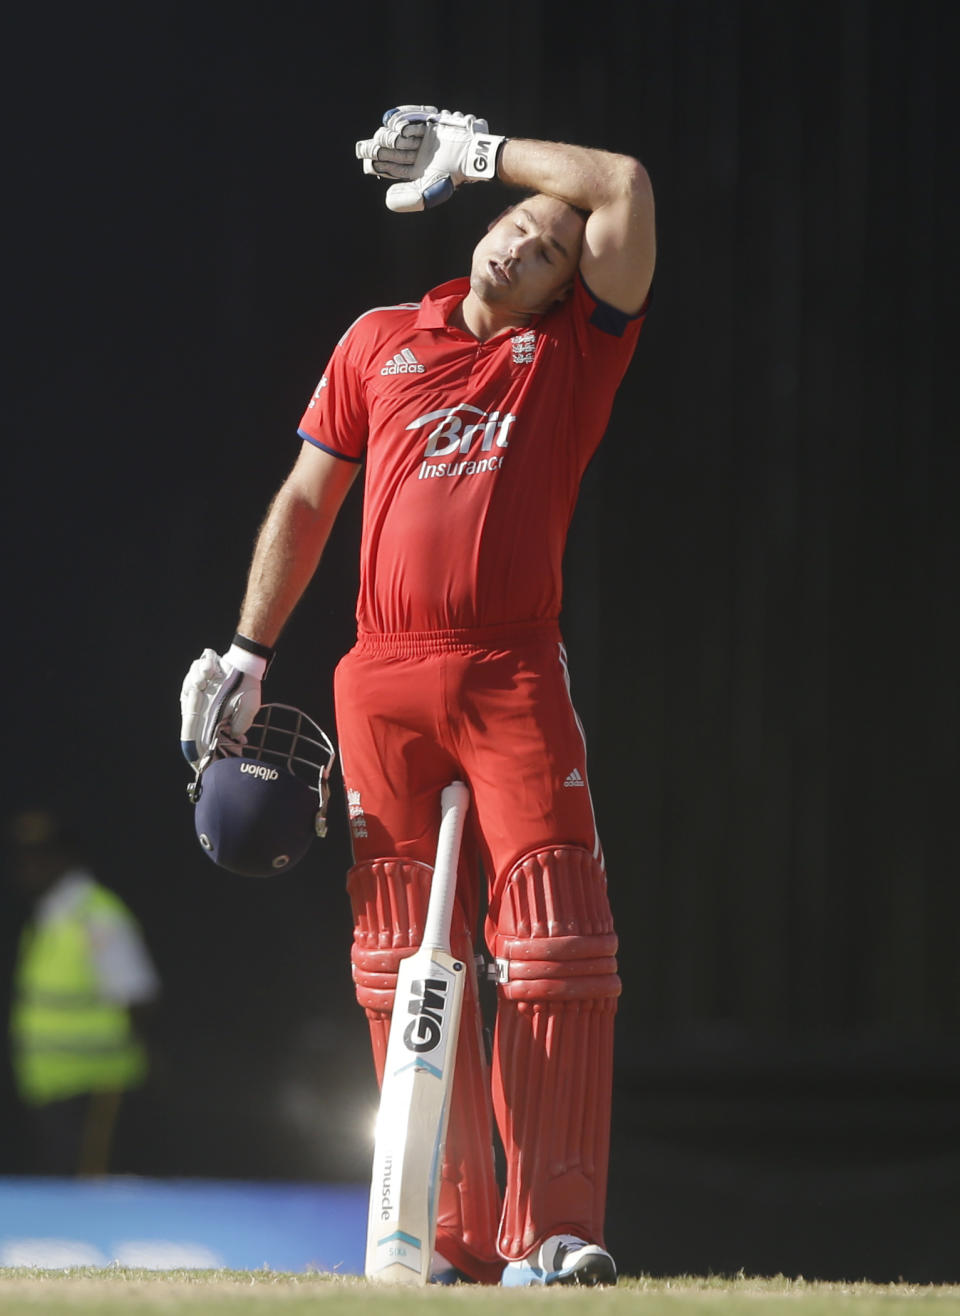 England's Michael Lumb wipes his head after he scored a century with Joe Root during their first one-day international cricket match against West Indies at the Sir Vivian Richards Cricket Ground in St. John's, Antigua, Friday, Feb. 28, 2014. (AP Photo/Ricardo Mazalan)